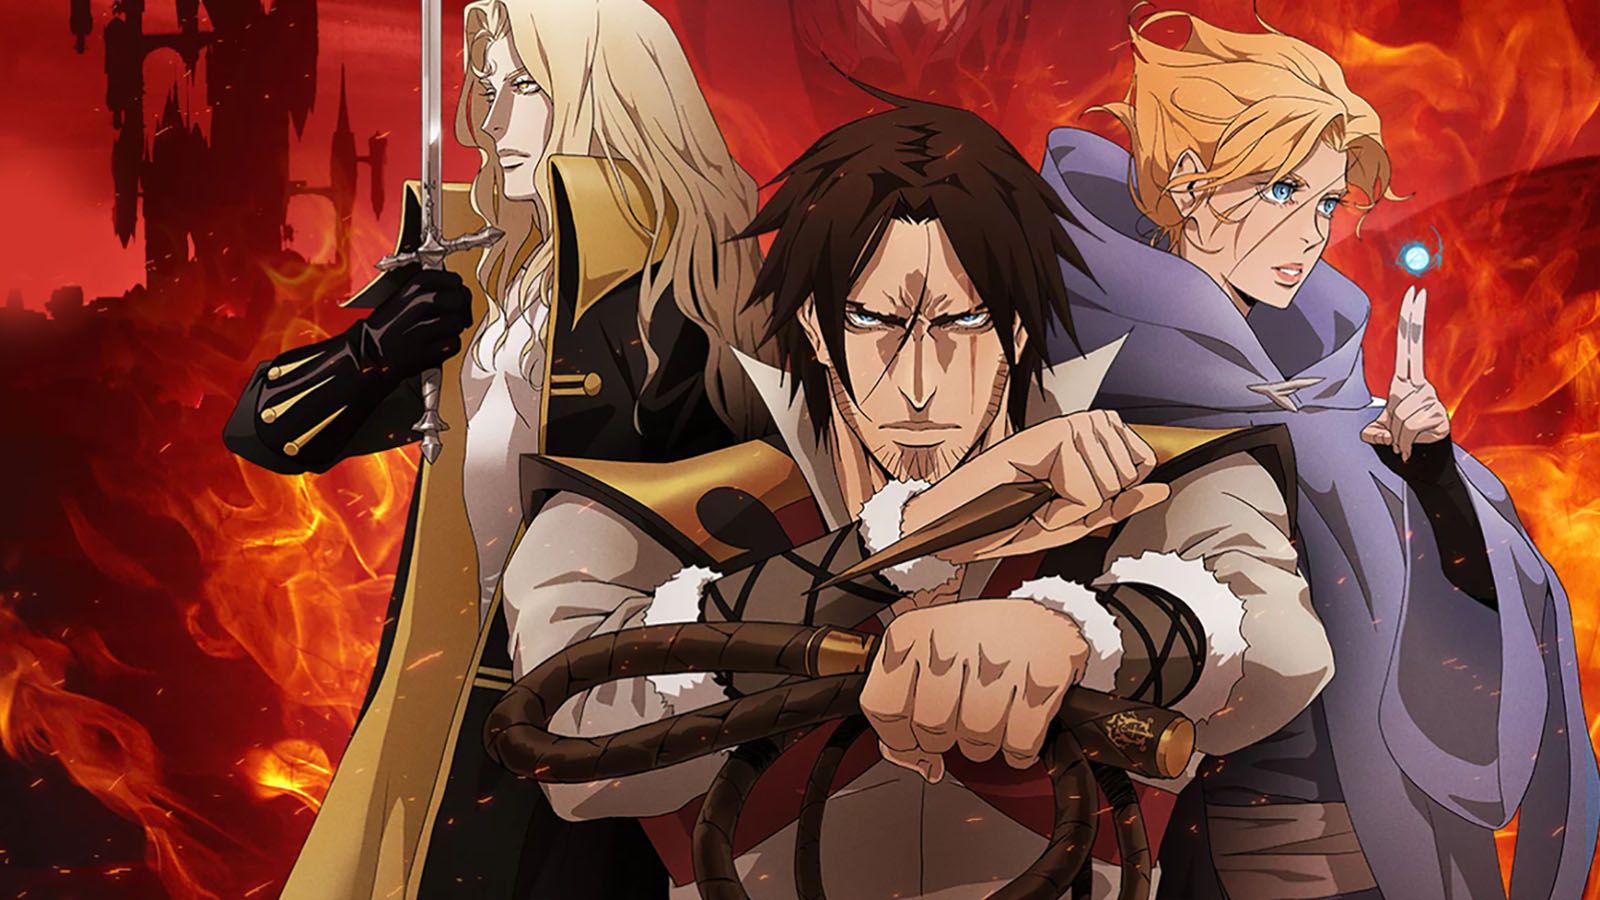 Castlevania Season 4: Release Date, Plot and Cast of the show!